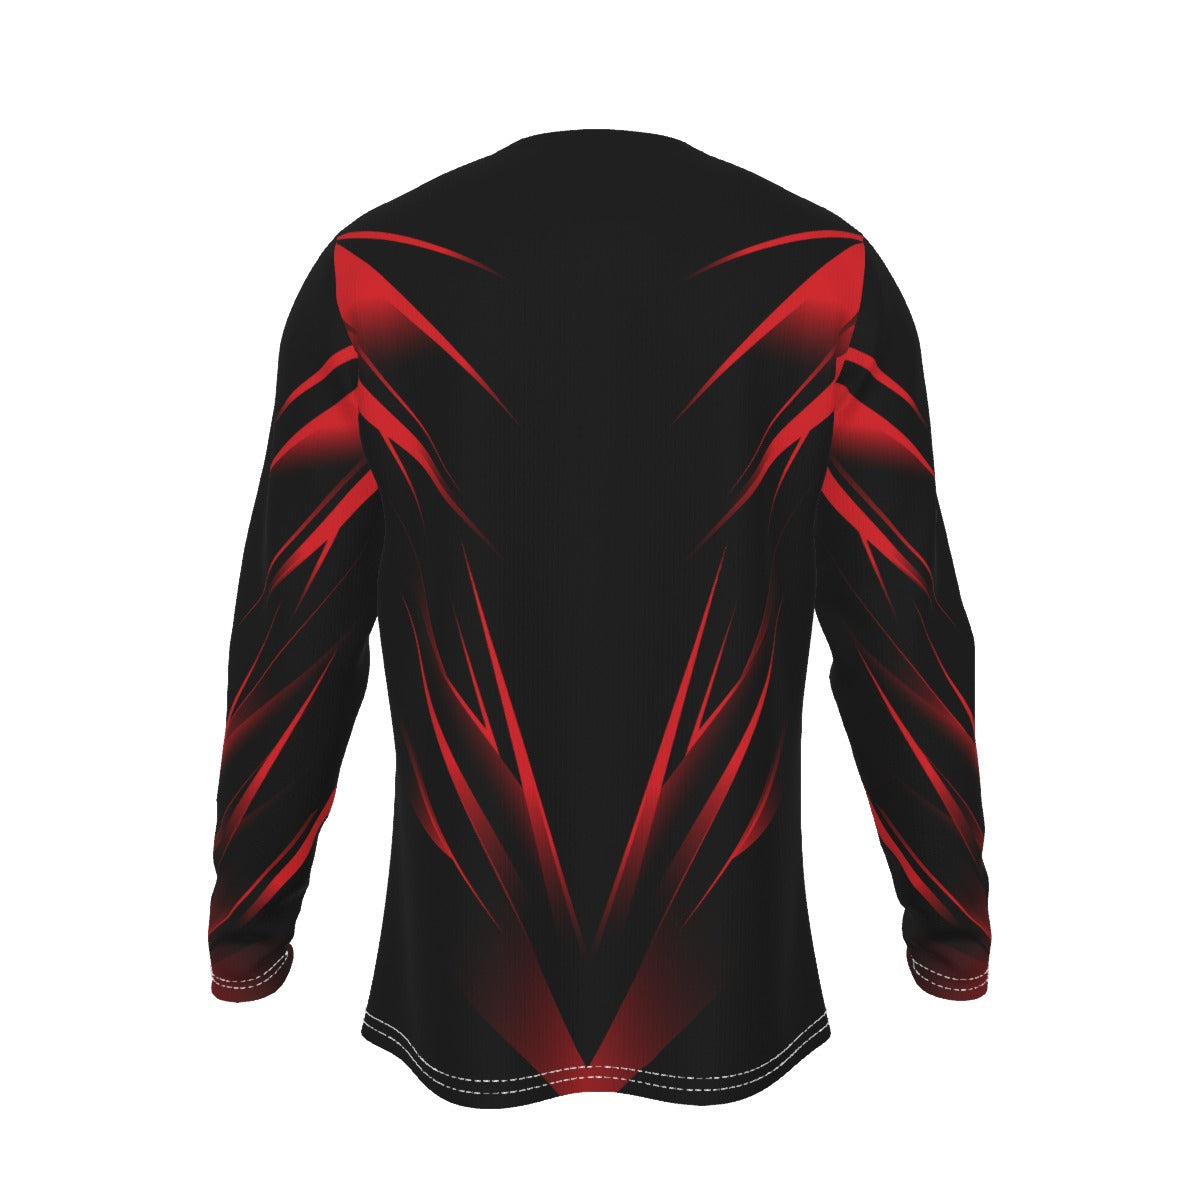 Miami Lit Cool DRI Moisture Wicking Performance Sports and Casual Long Sleeve Shirt (SUPERHERO PRINTED ON FRONT) - DG Trends Streetwear